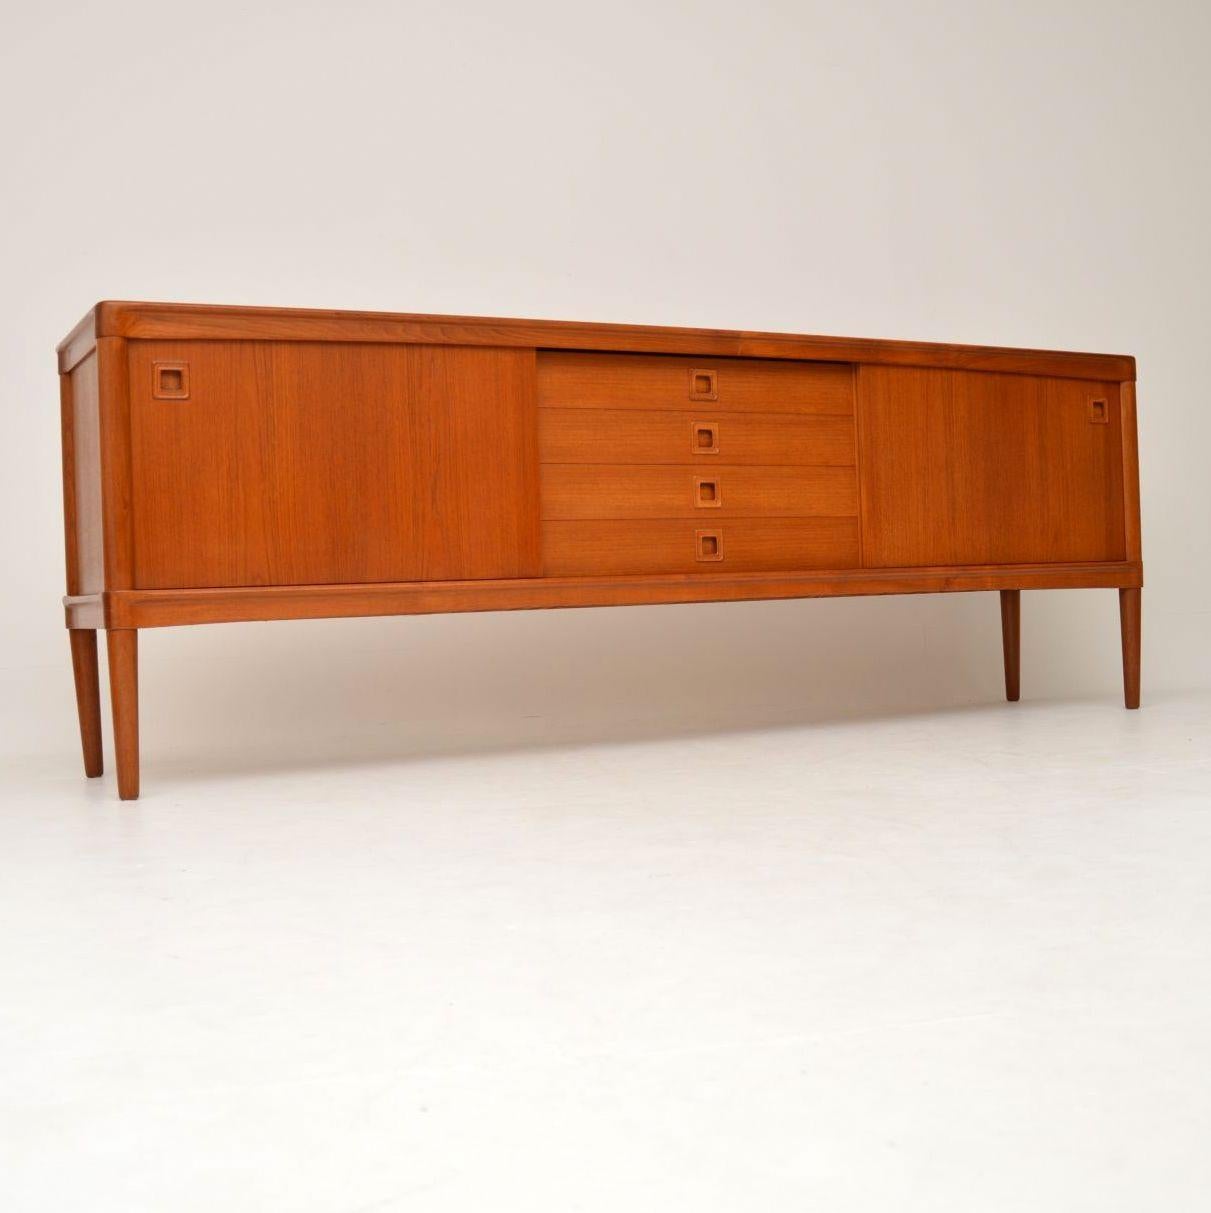 An impressive and extremely well made Danish vintage sideboard in teak, this was designed by Henry Klein and was made in Denmark by Brahmin in the 1960s. The quality is phenomenal, and the condition is immaculate, we have had this stripped and